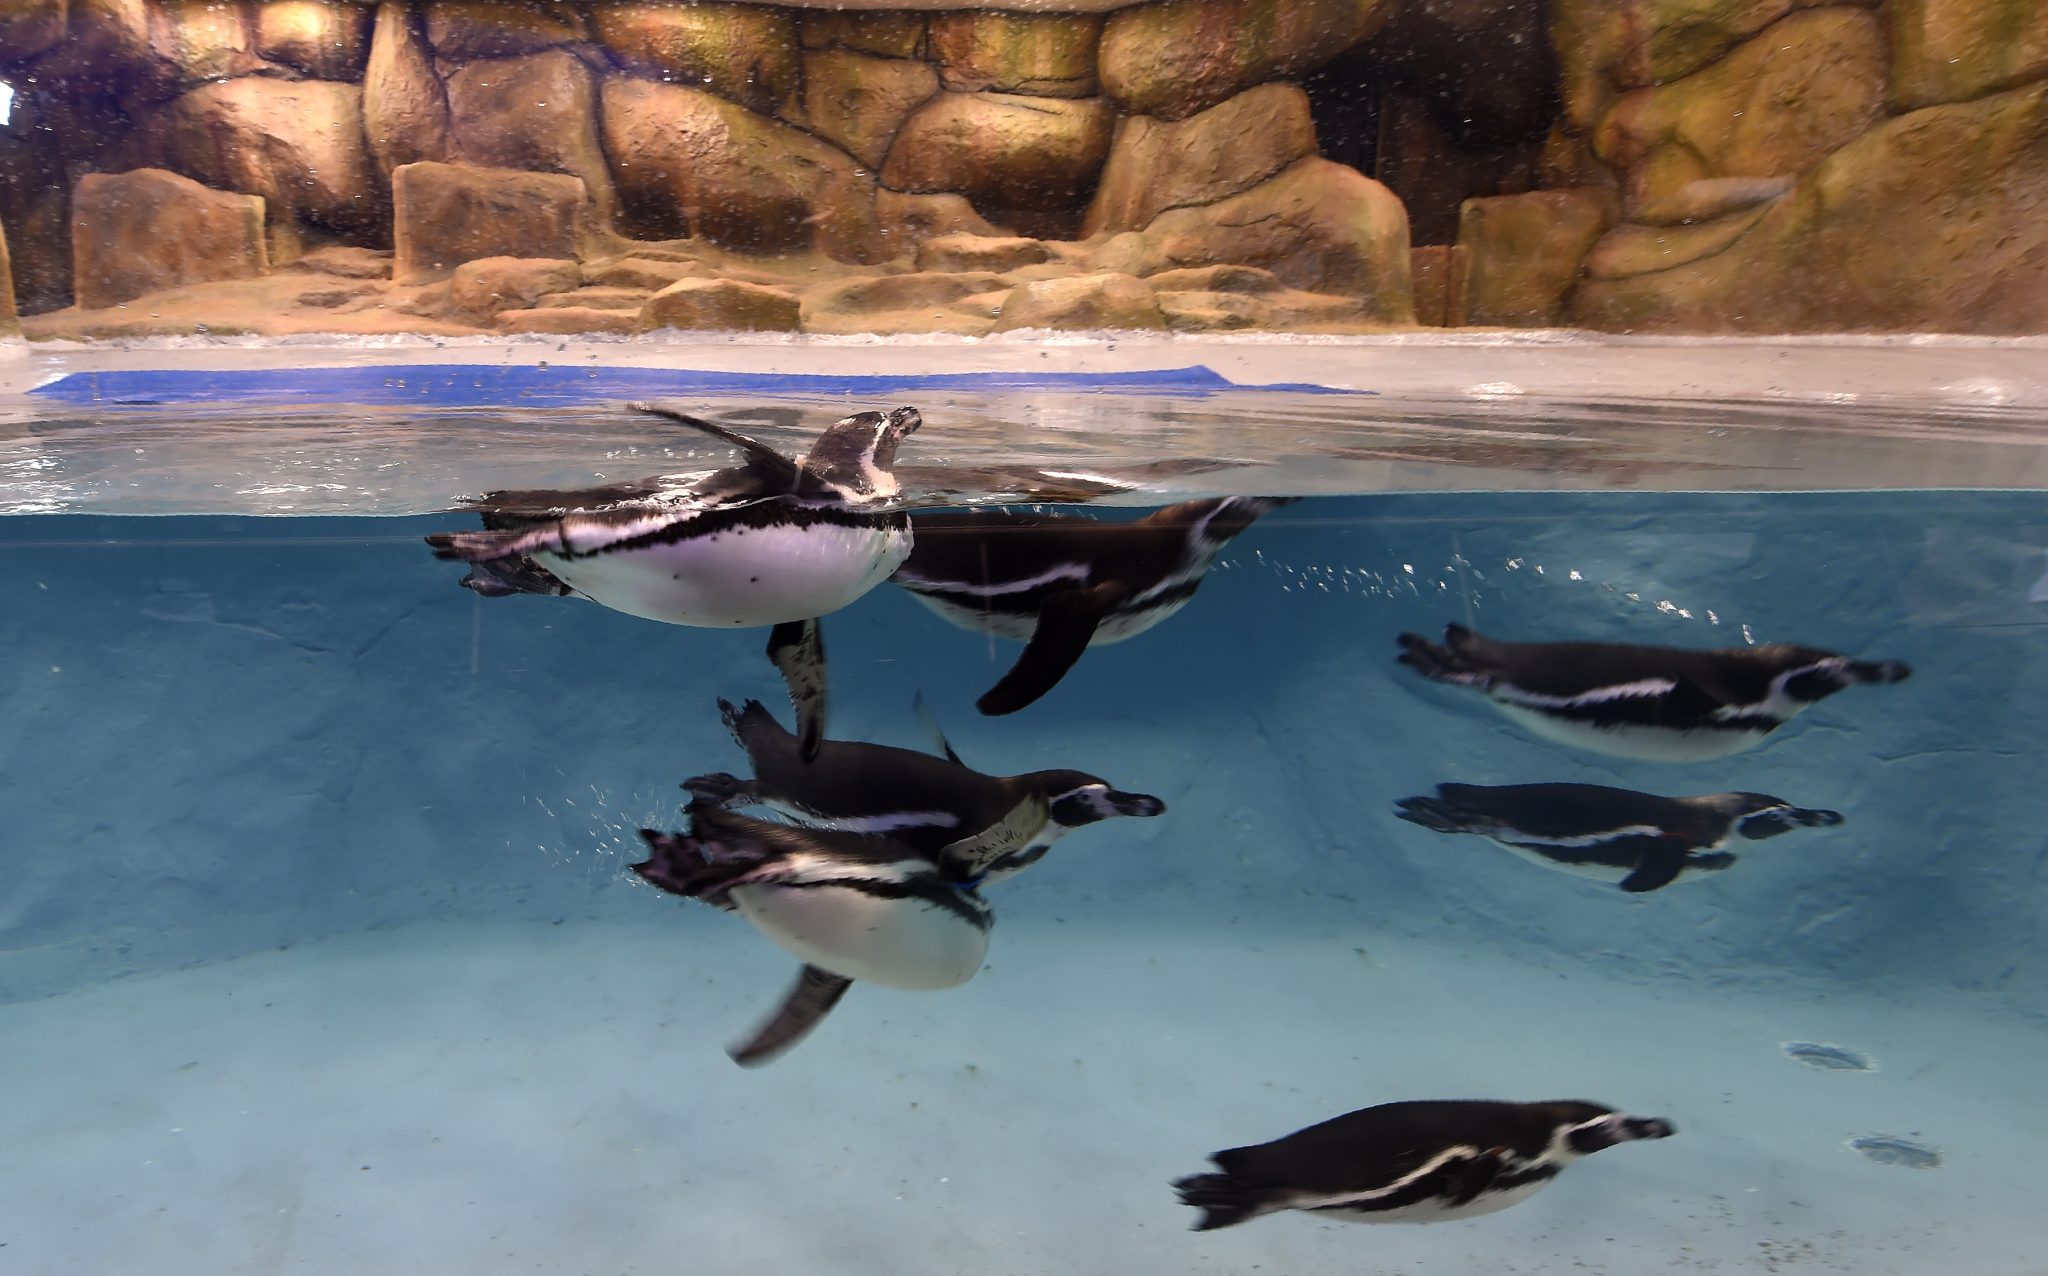 Humboldt Penguins swim in their enclosure at the city zoo in Mumbai on March 9, 2017. Seven Humboldt penguins from South Korea have been finally moved to an enclosure equipped with achiller system in the Byculla Zoo after being kept in quarantine for seven months. / AFP PHOTO / Indranil MUKHERJEE